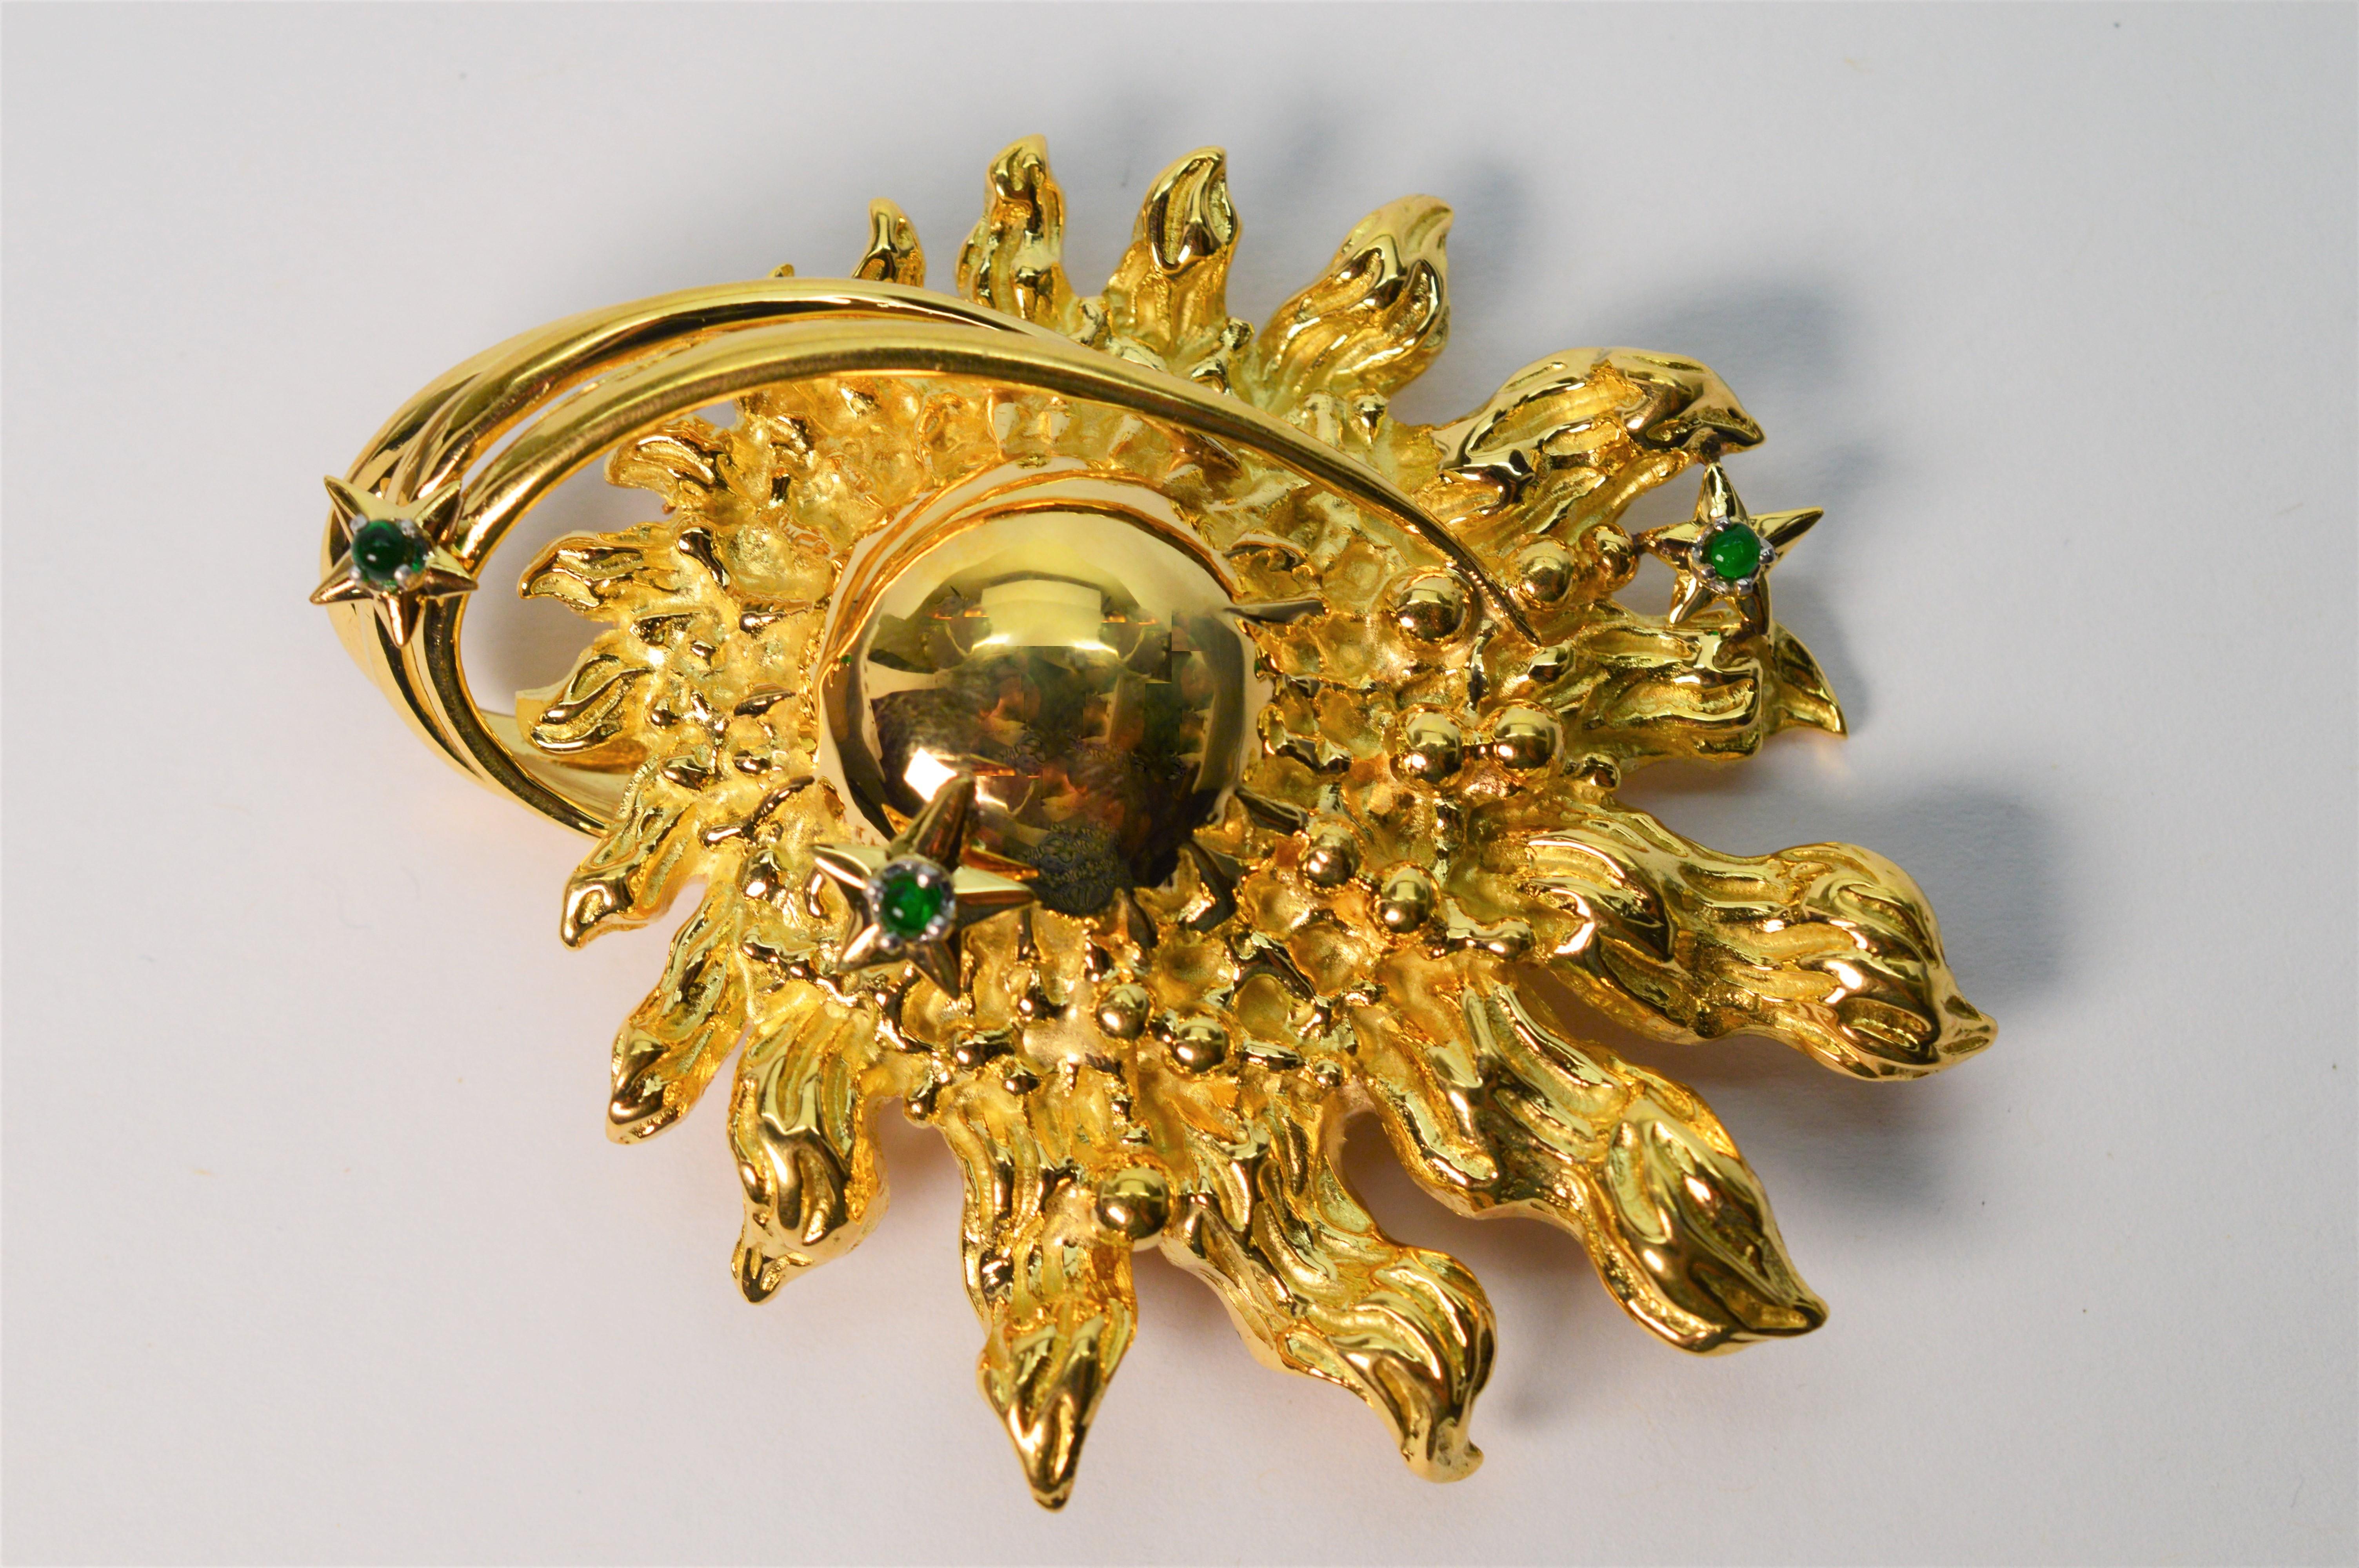 Custom made for Tiffany, this celestial design brooch commissioned by the National Women's Hall of Fame in eighteen karat yellow gold was known to be for private presentation in 1973 honoring film and stage actress Helen Hayes (1900-1993). With this